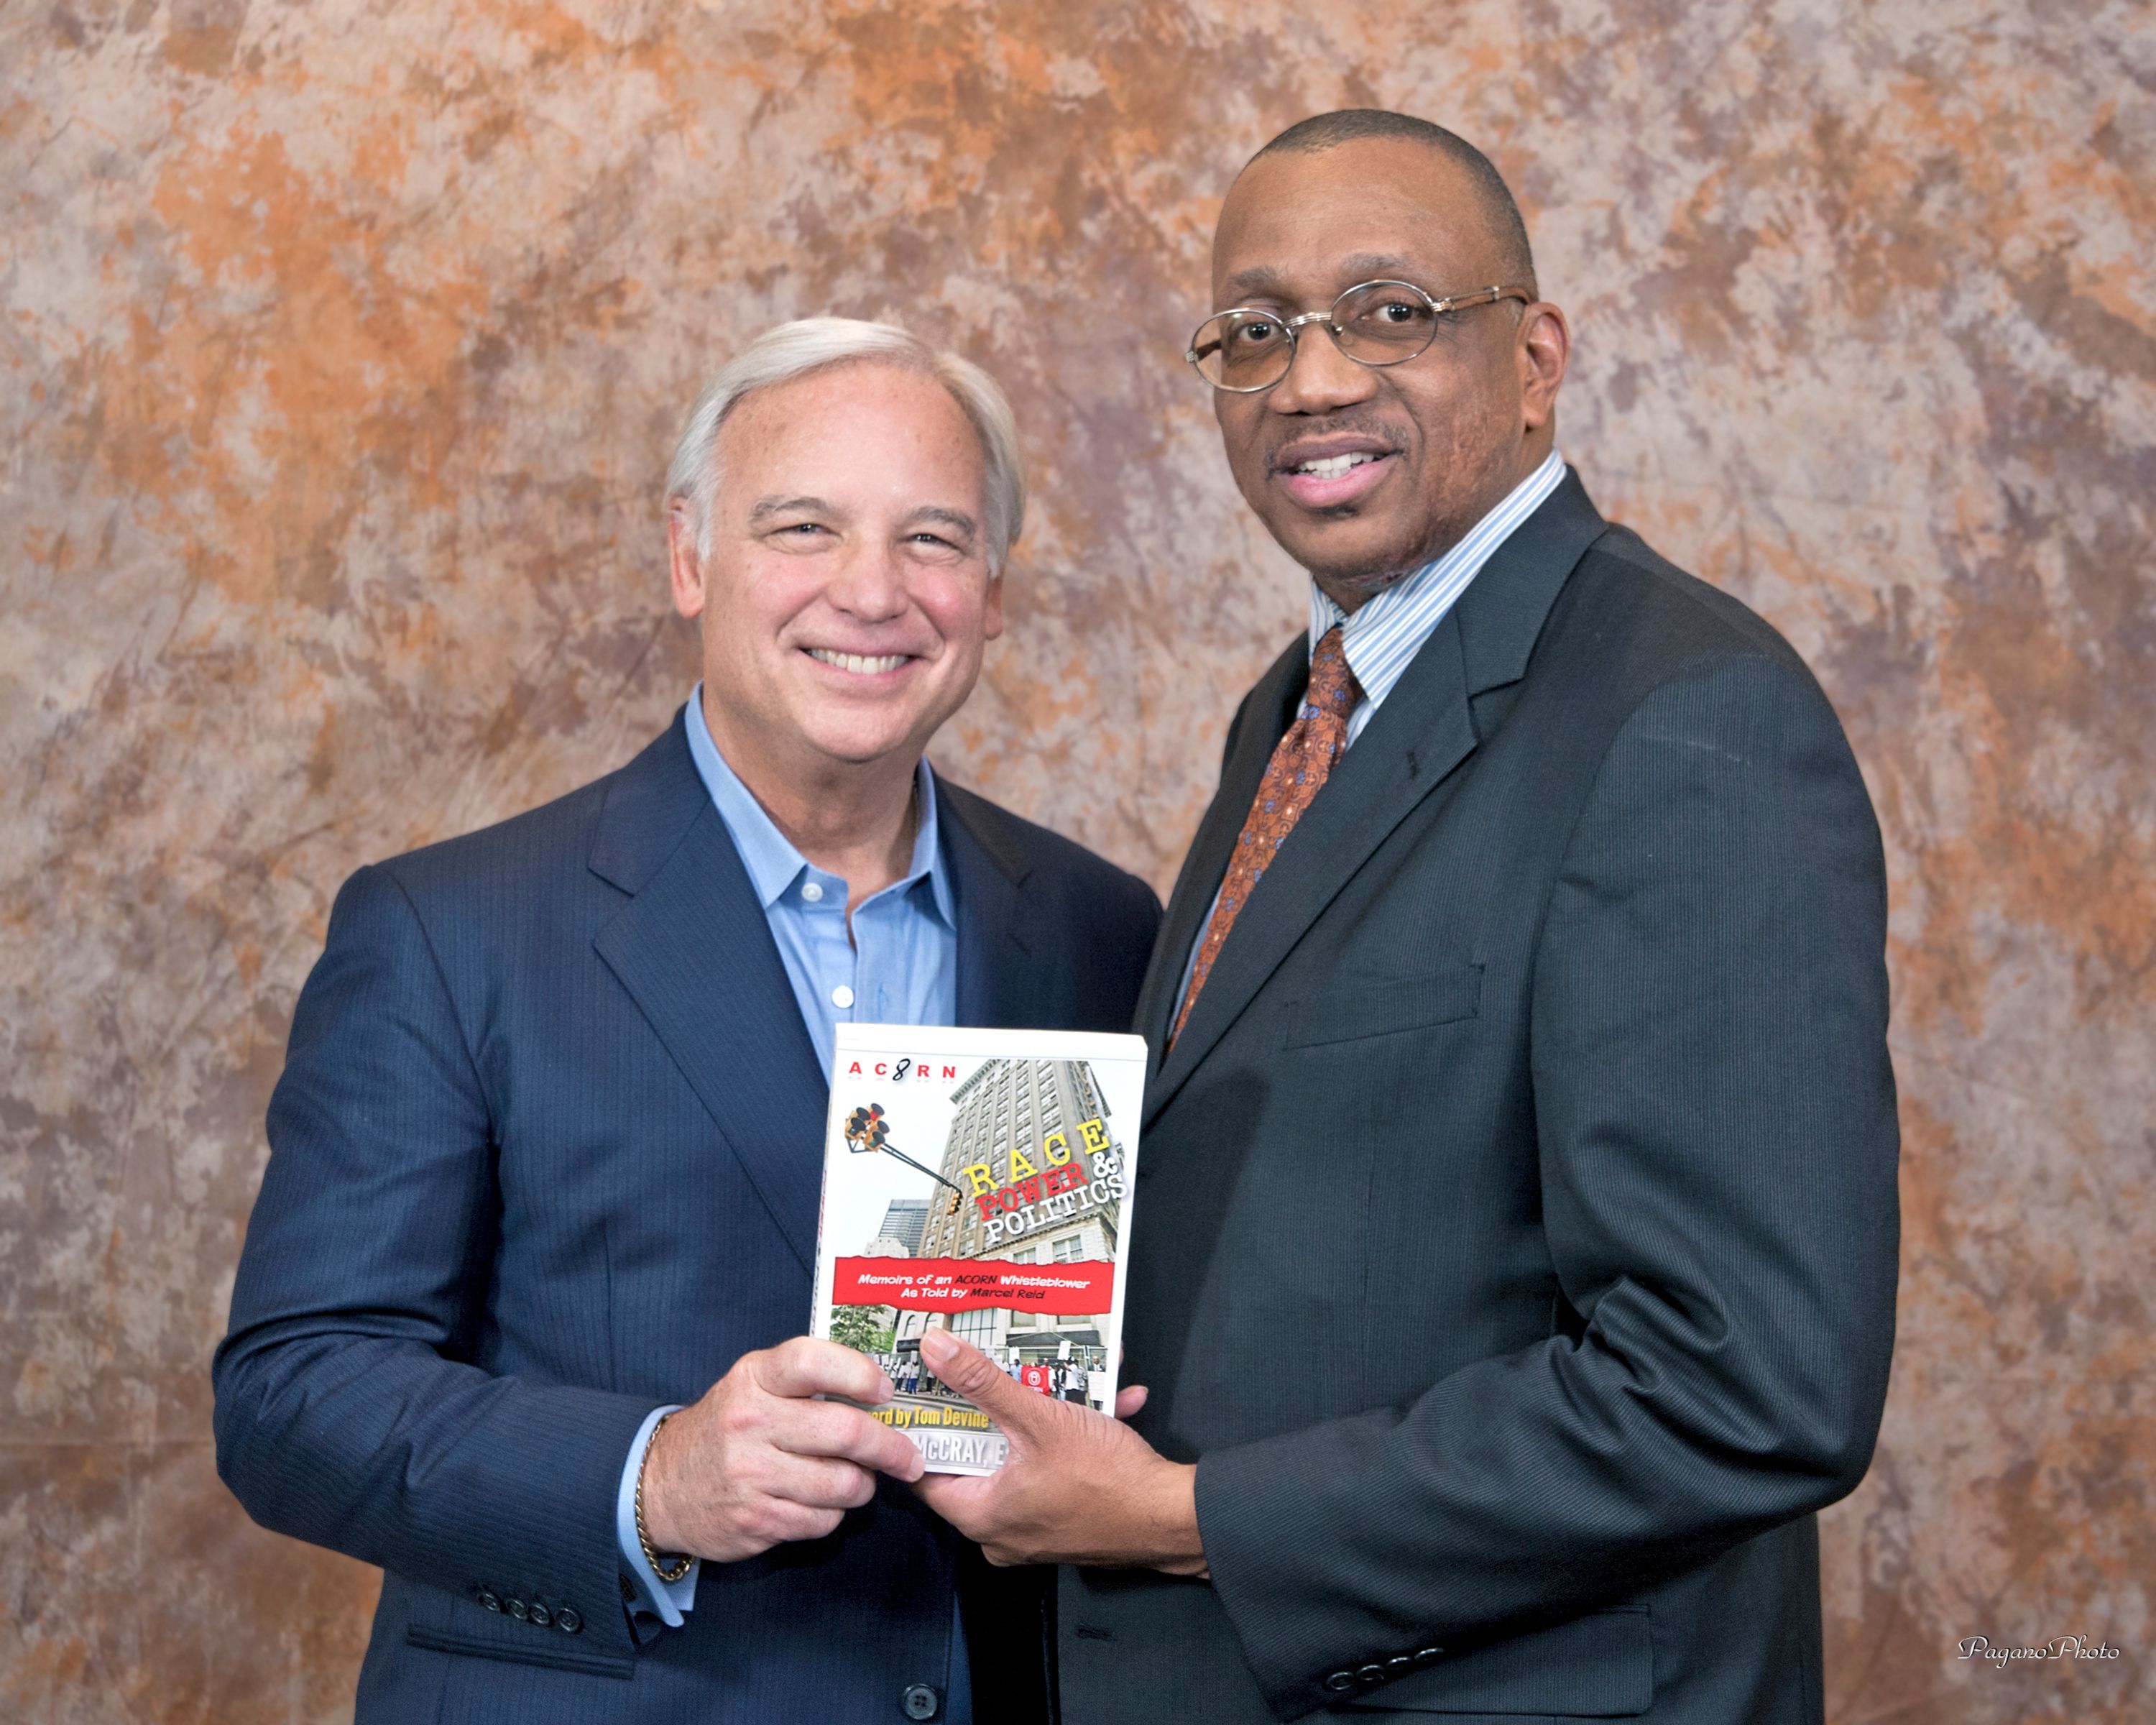 Best Selling Authors Photo: Jack Canfield and Michael McCray